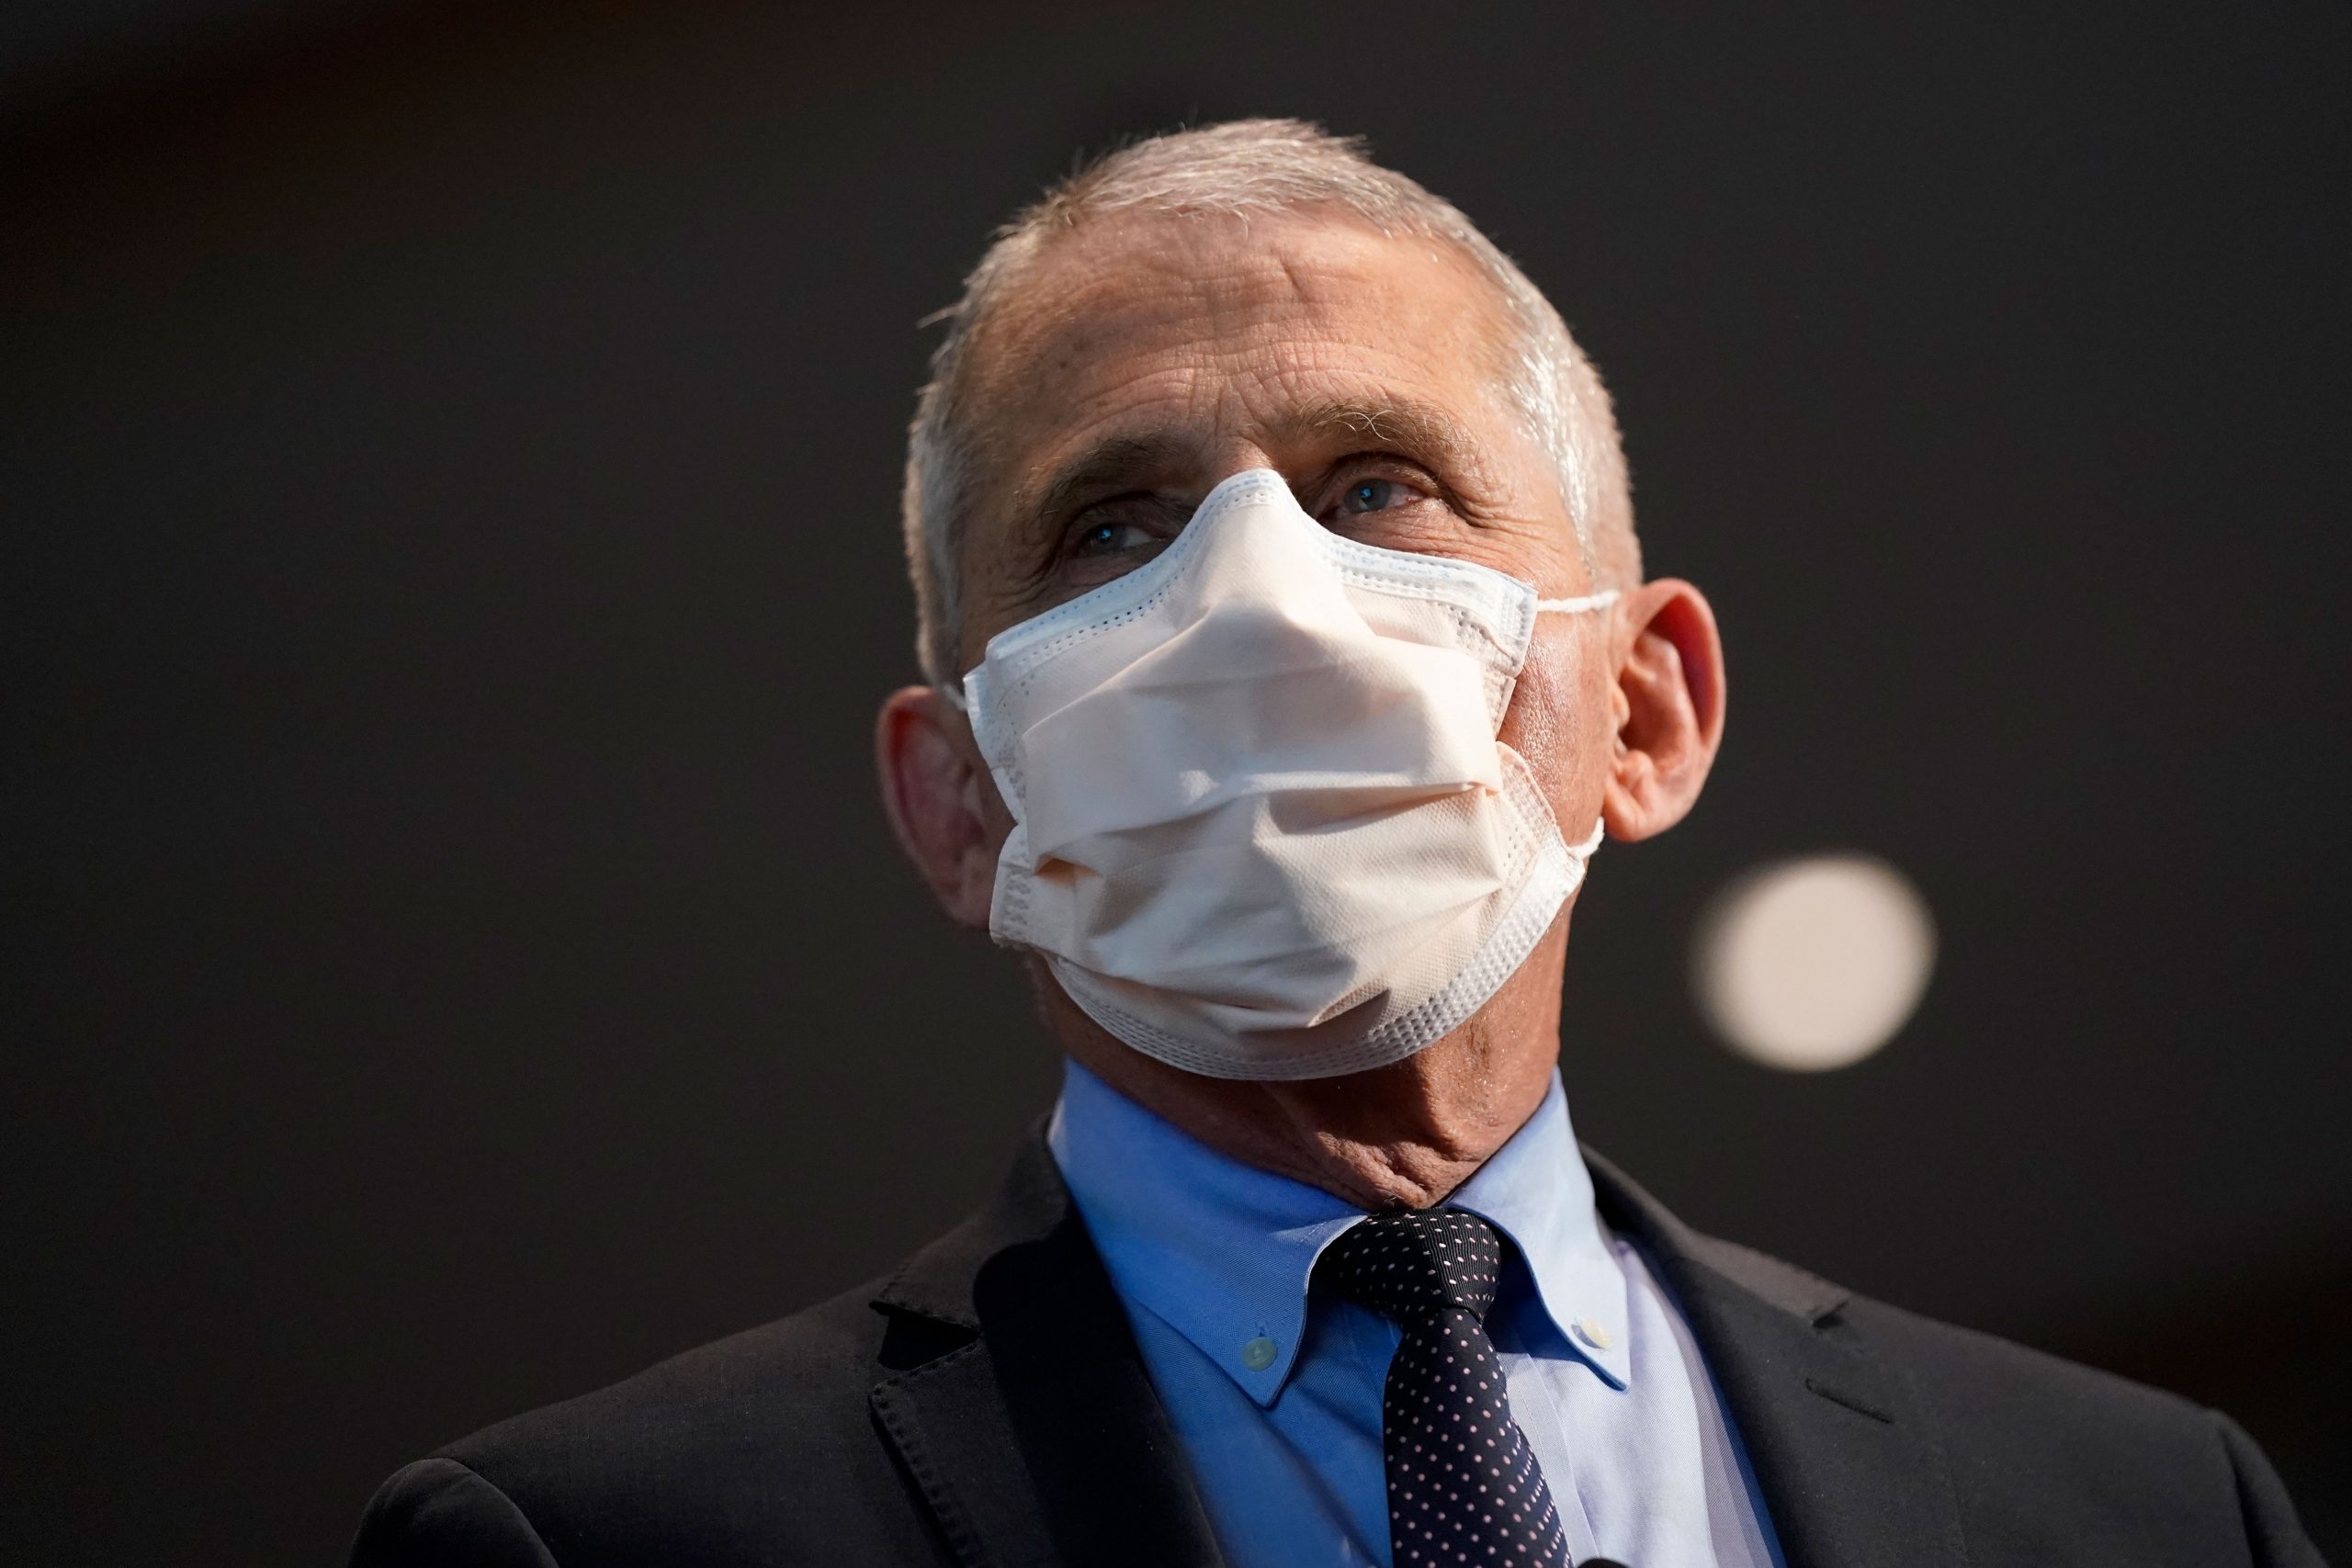 Fauci says distributing first doses of the Covid-19 vaccine to more people is “under study”